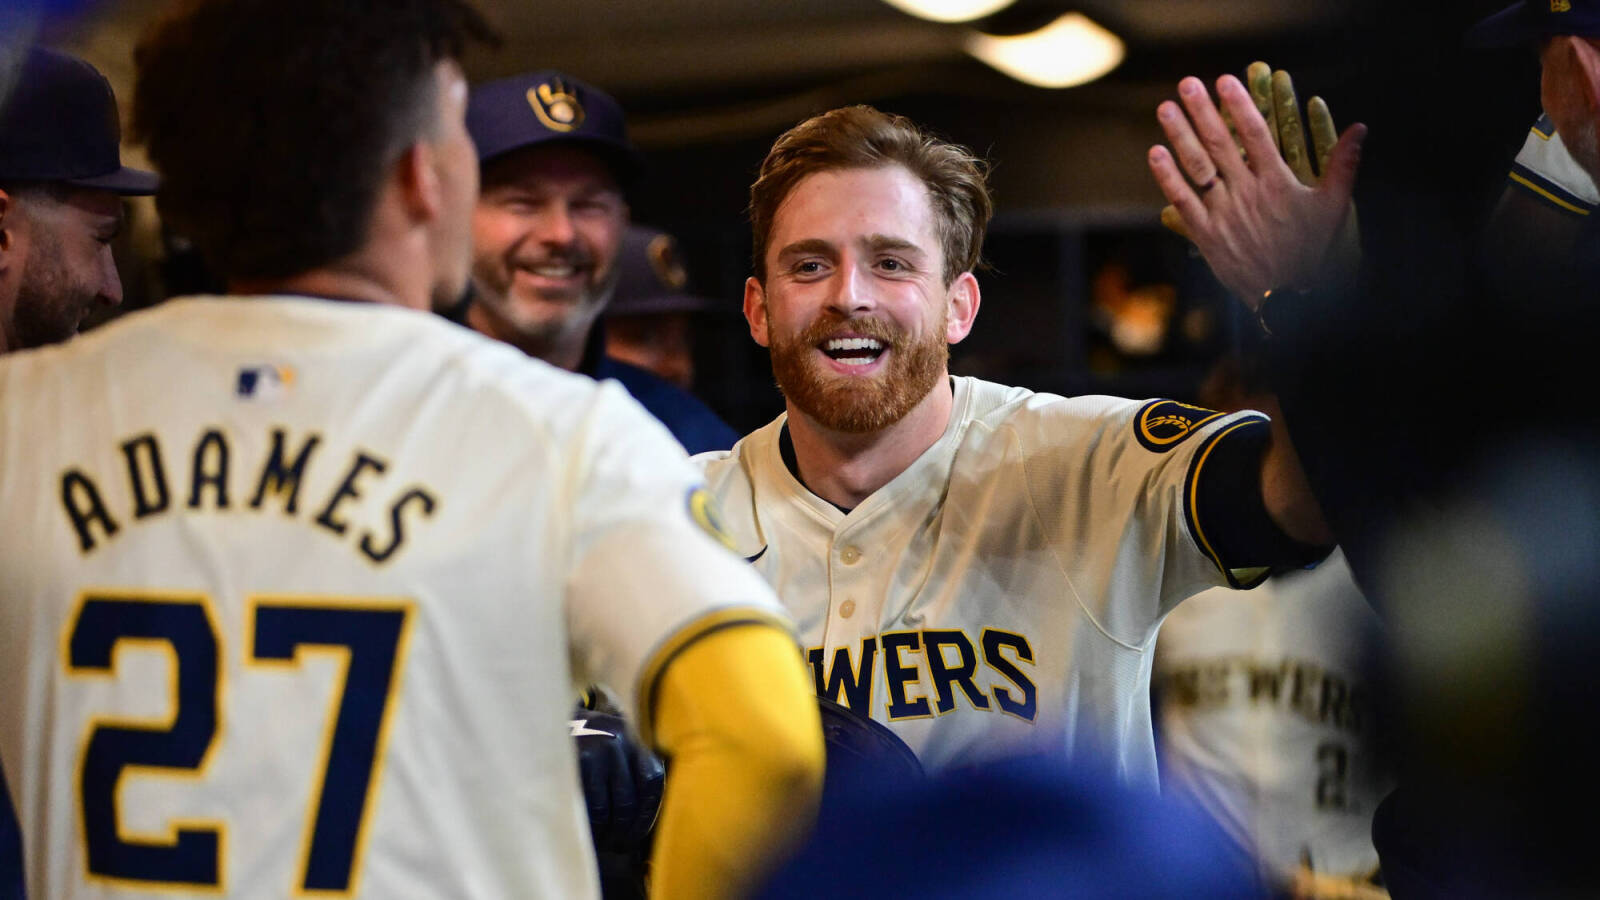 MLB rookie check-in: Brewers' Oliver Dunn overtakes Jackson Chourio for top spot